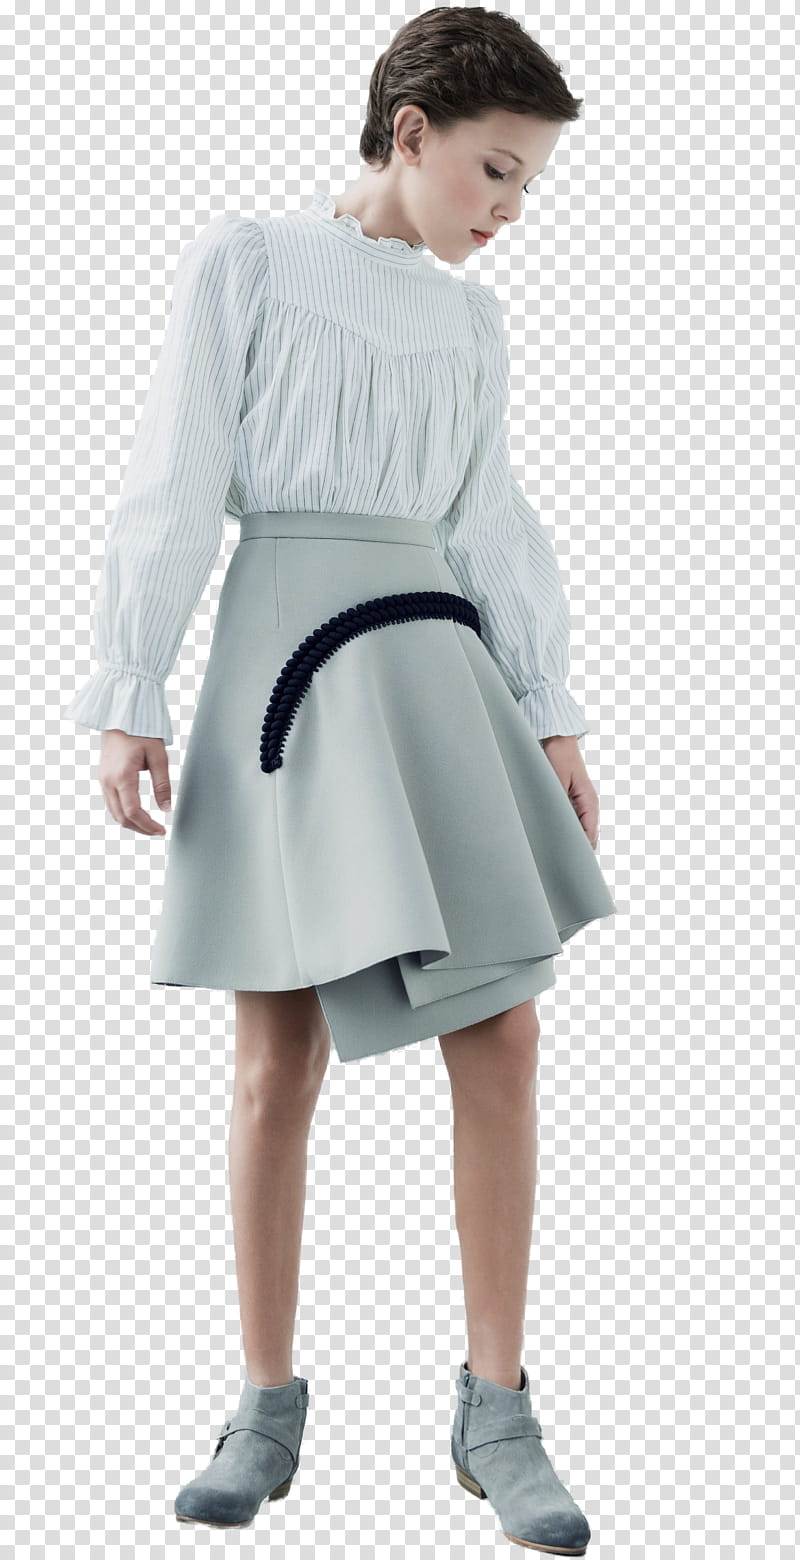 Millie Bob, standing woman wearing white long-sleeved shirt and gray skirt transparent background PNG clipart